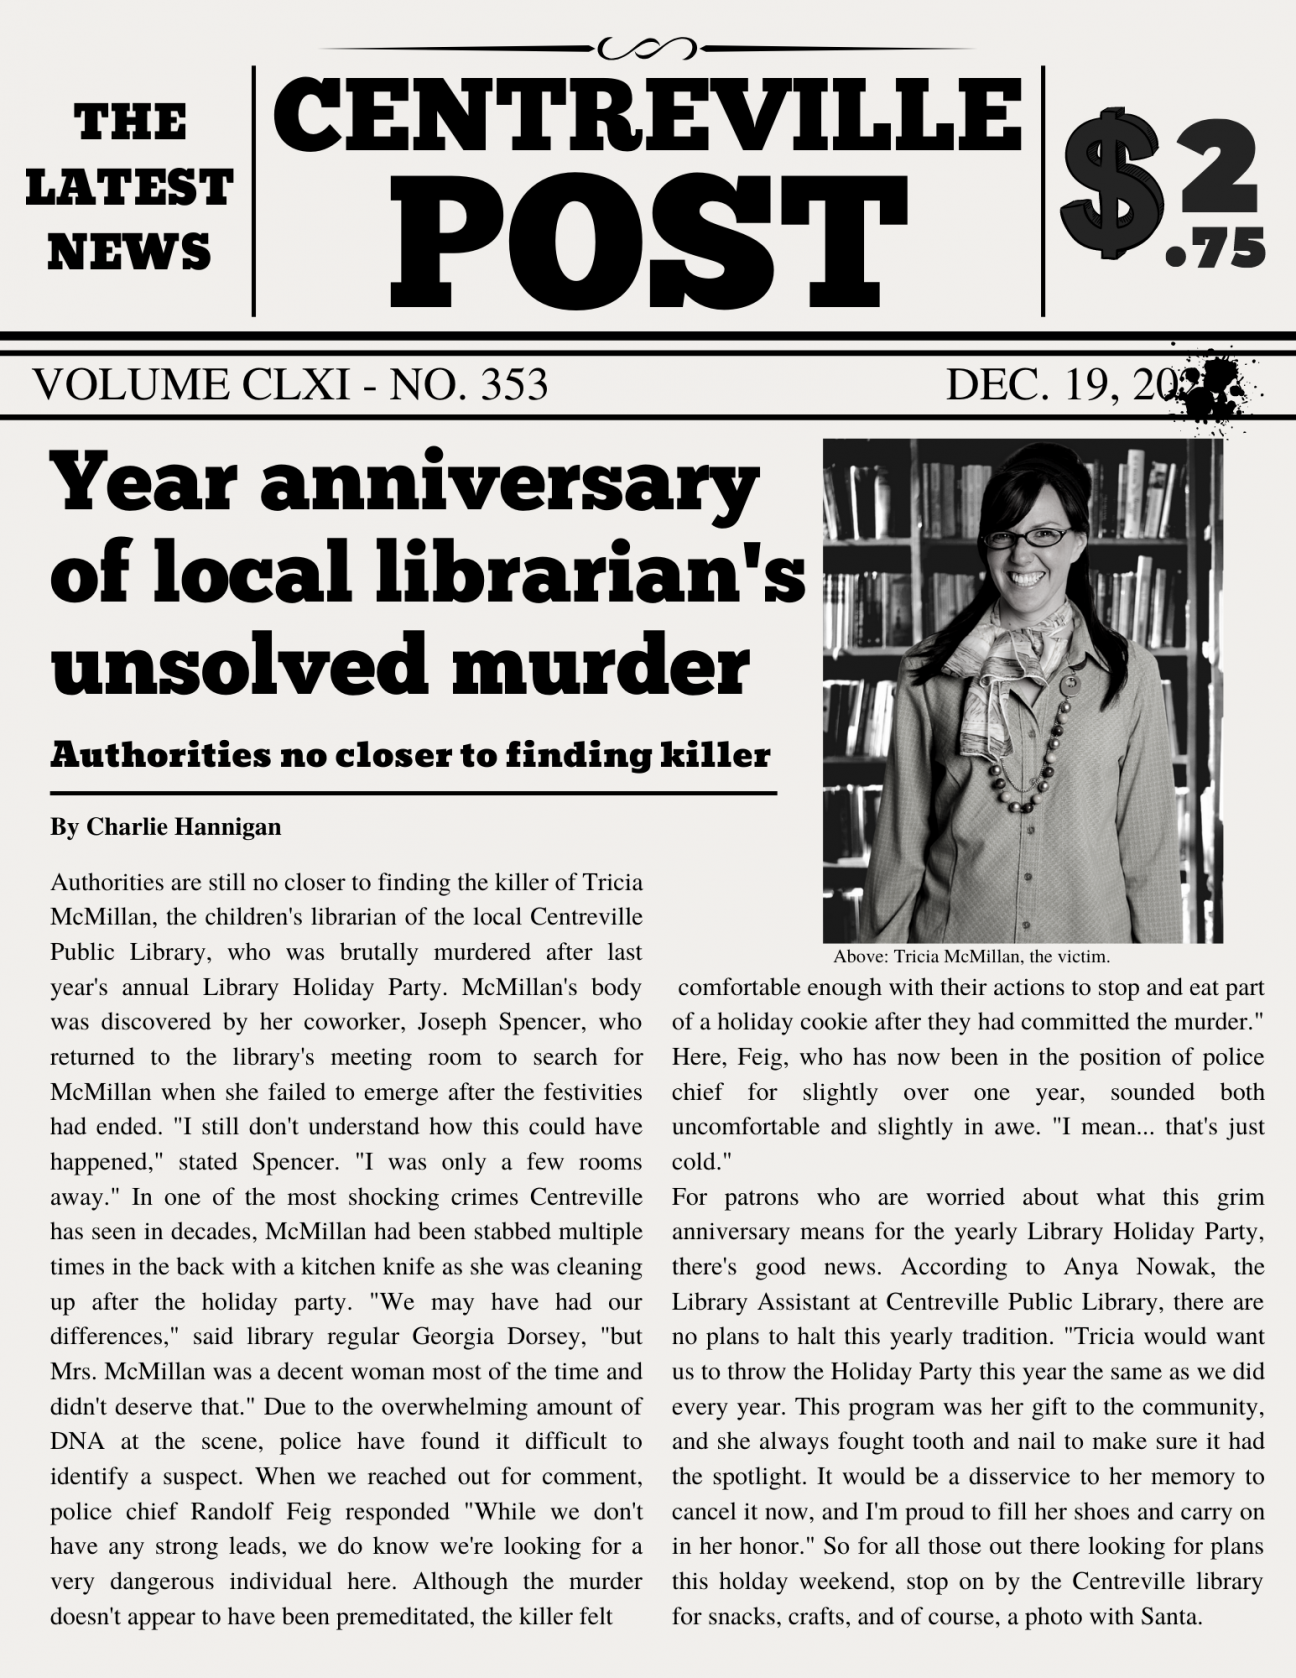 The frontpage of the Centreville Post. The article is about the one year anniversary of the death of Tricia McMillan.